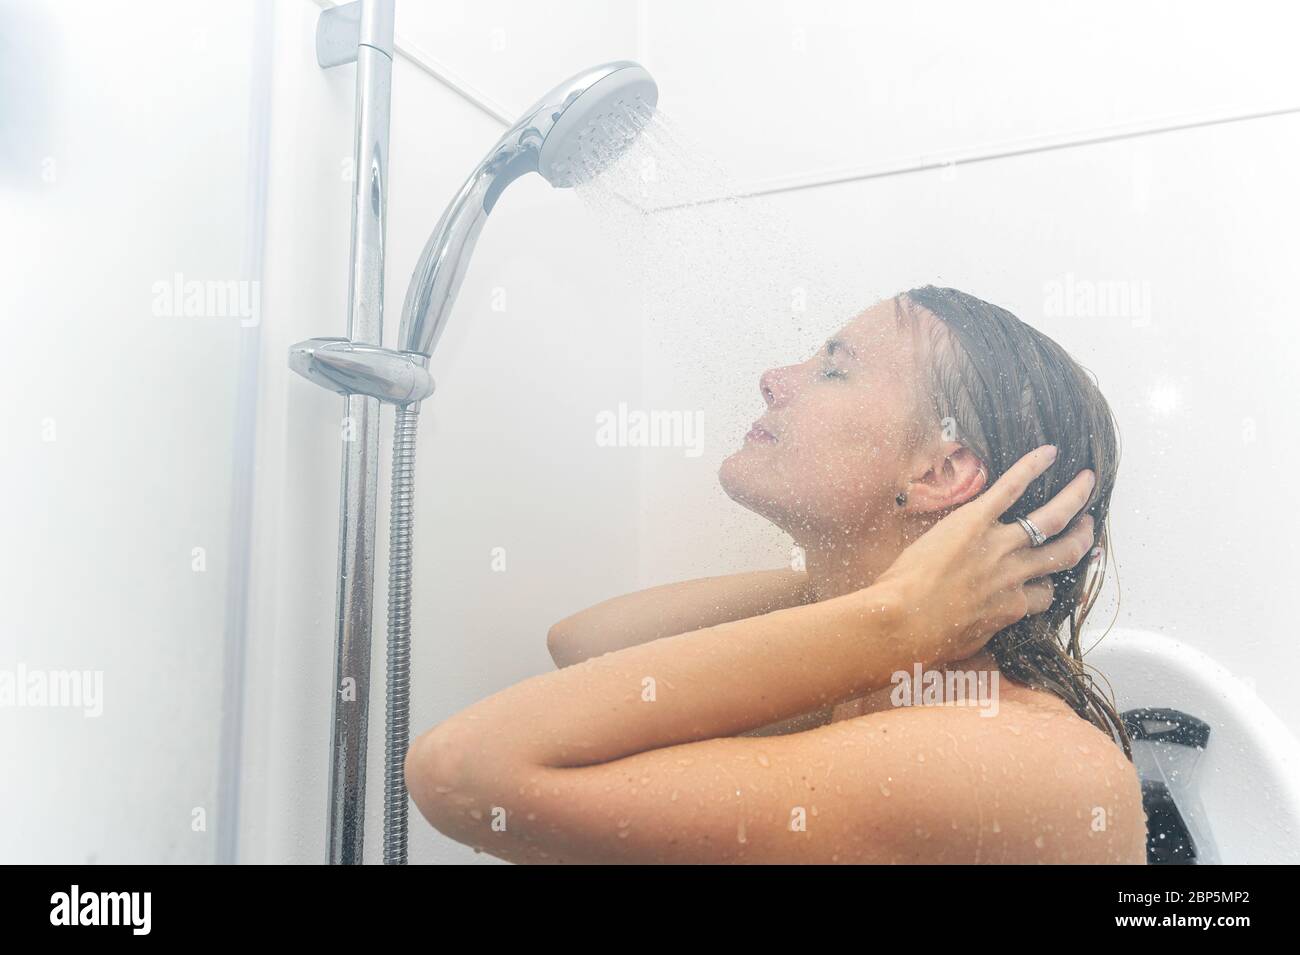 Young woman taking a hot shower showering hair relaxing under warm running ...